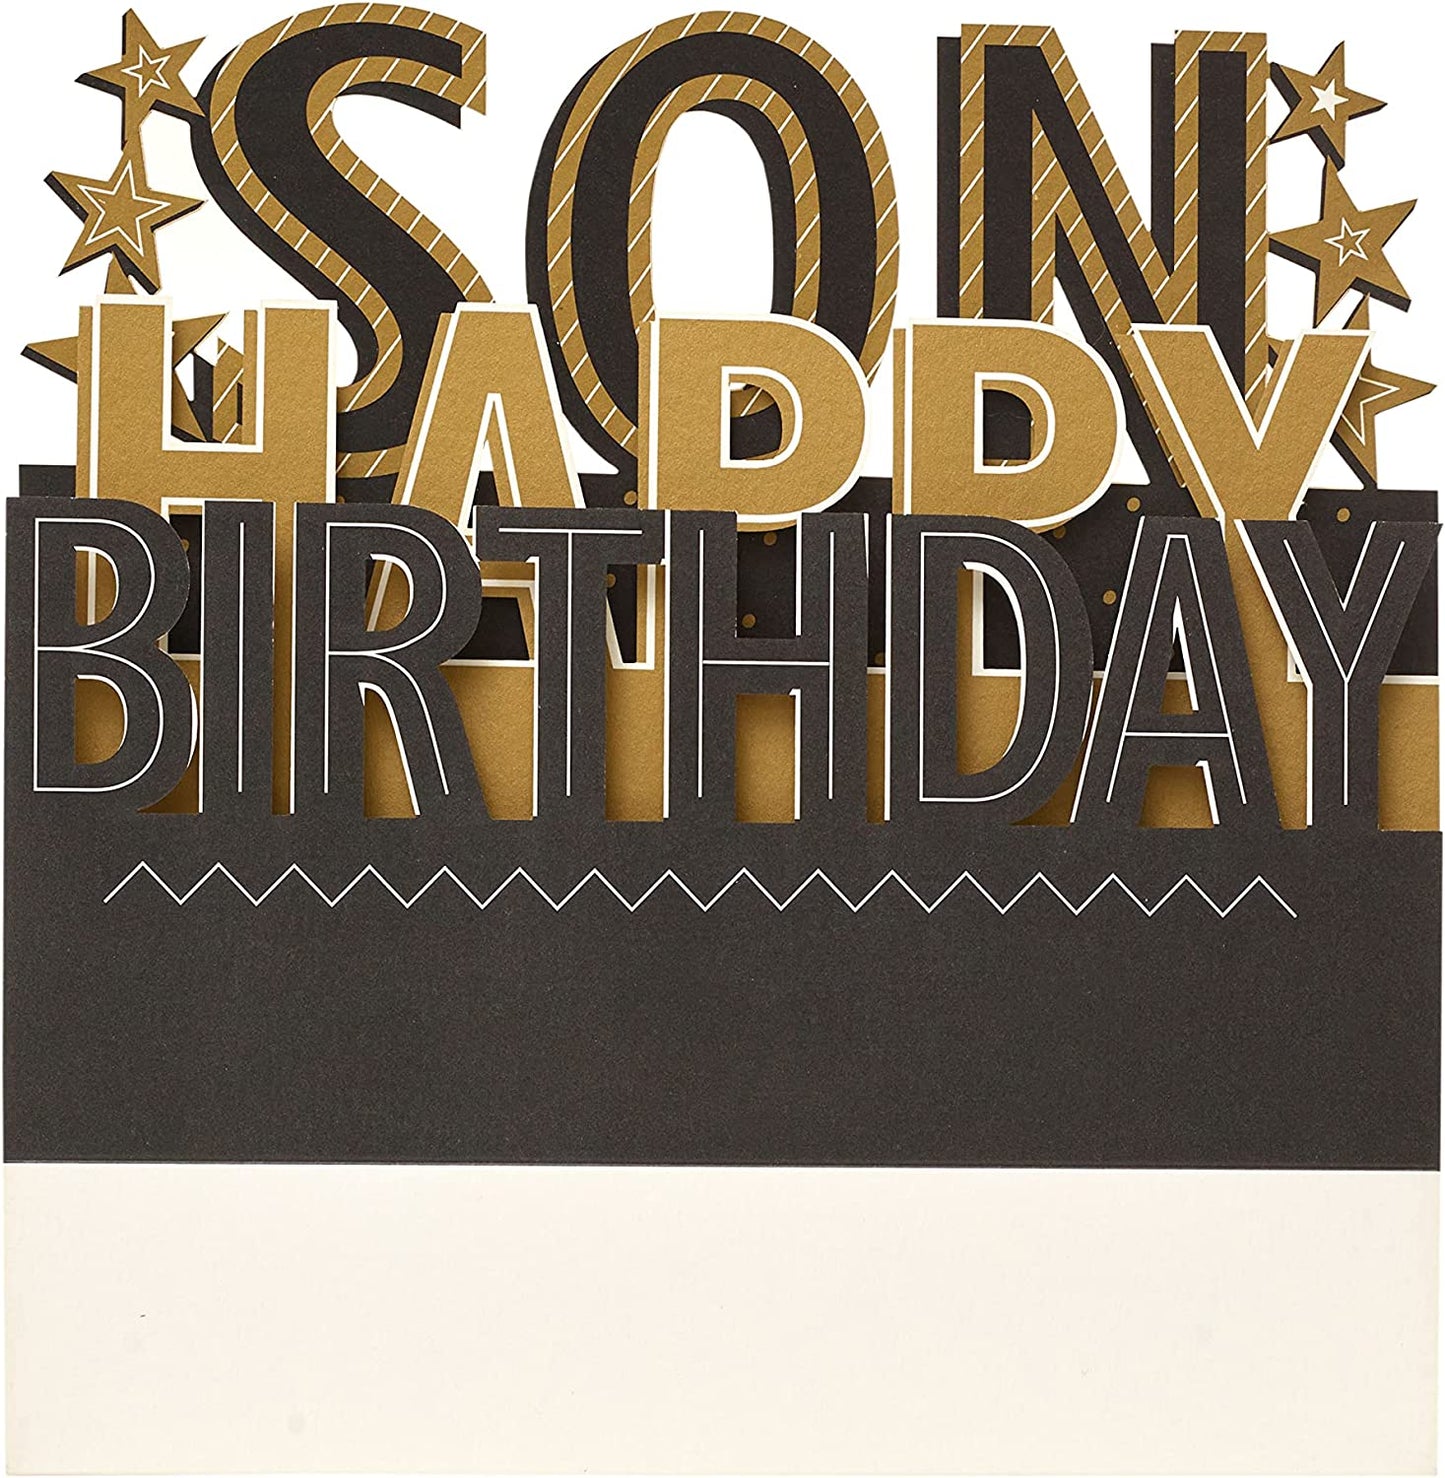 Sweet Design with Pop-Up 3D Lettering Son Birthday Card